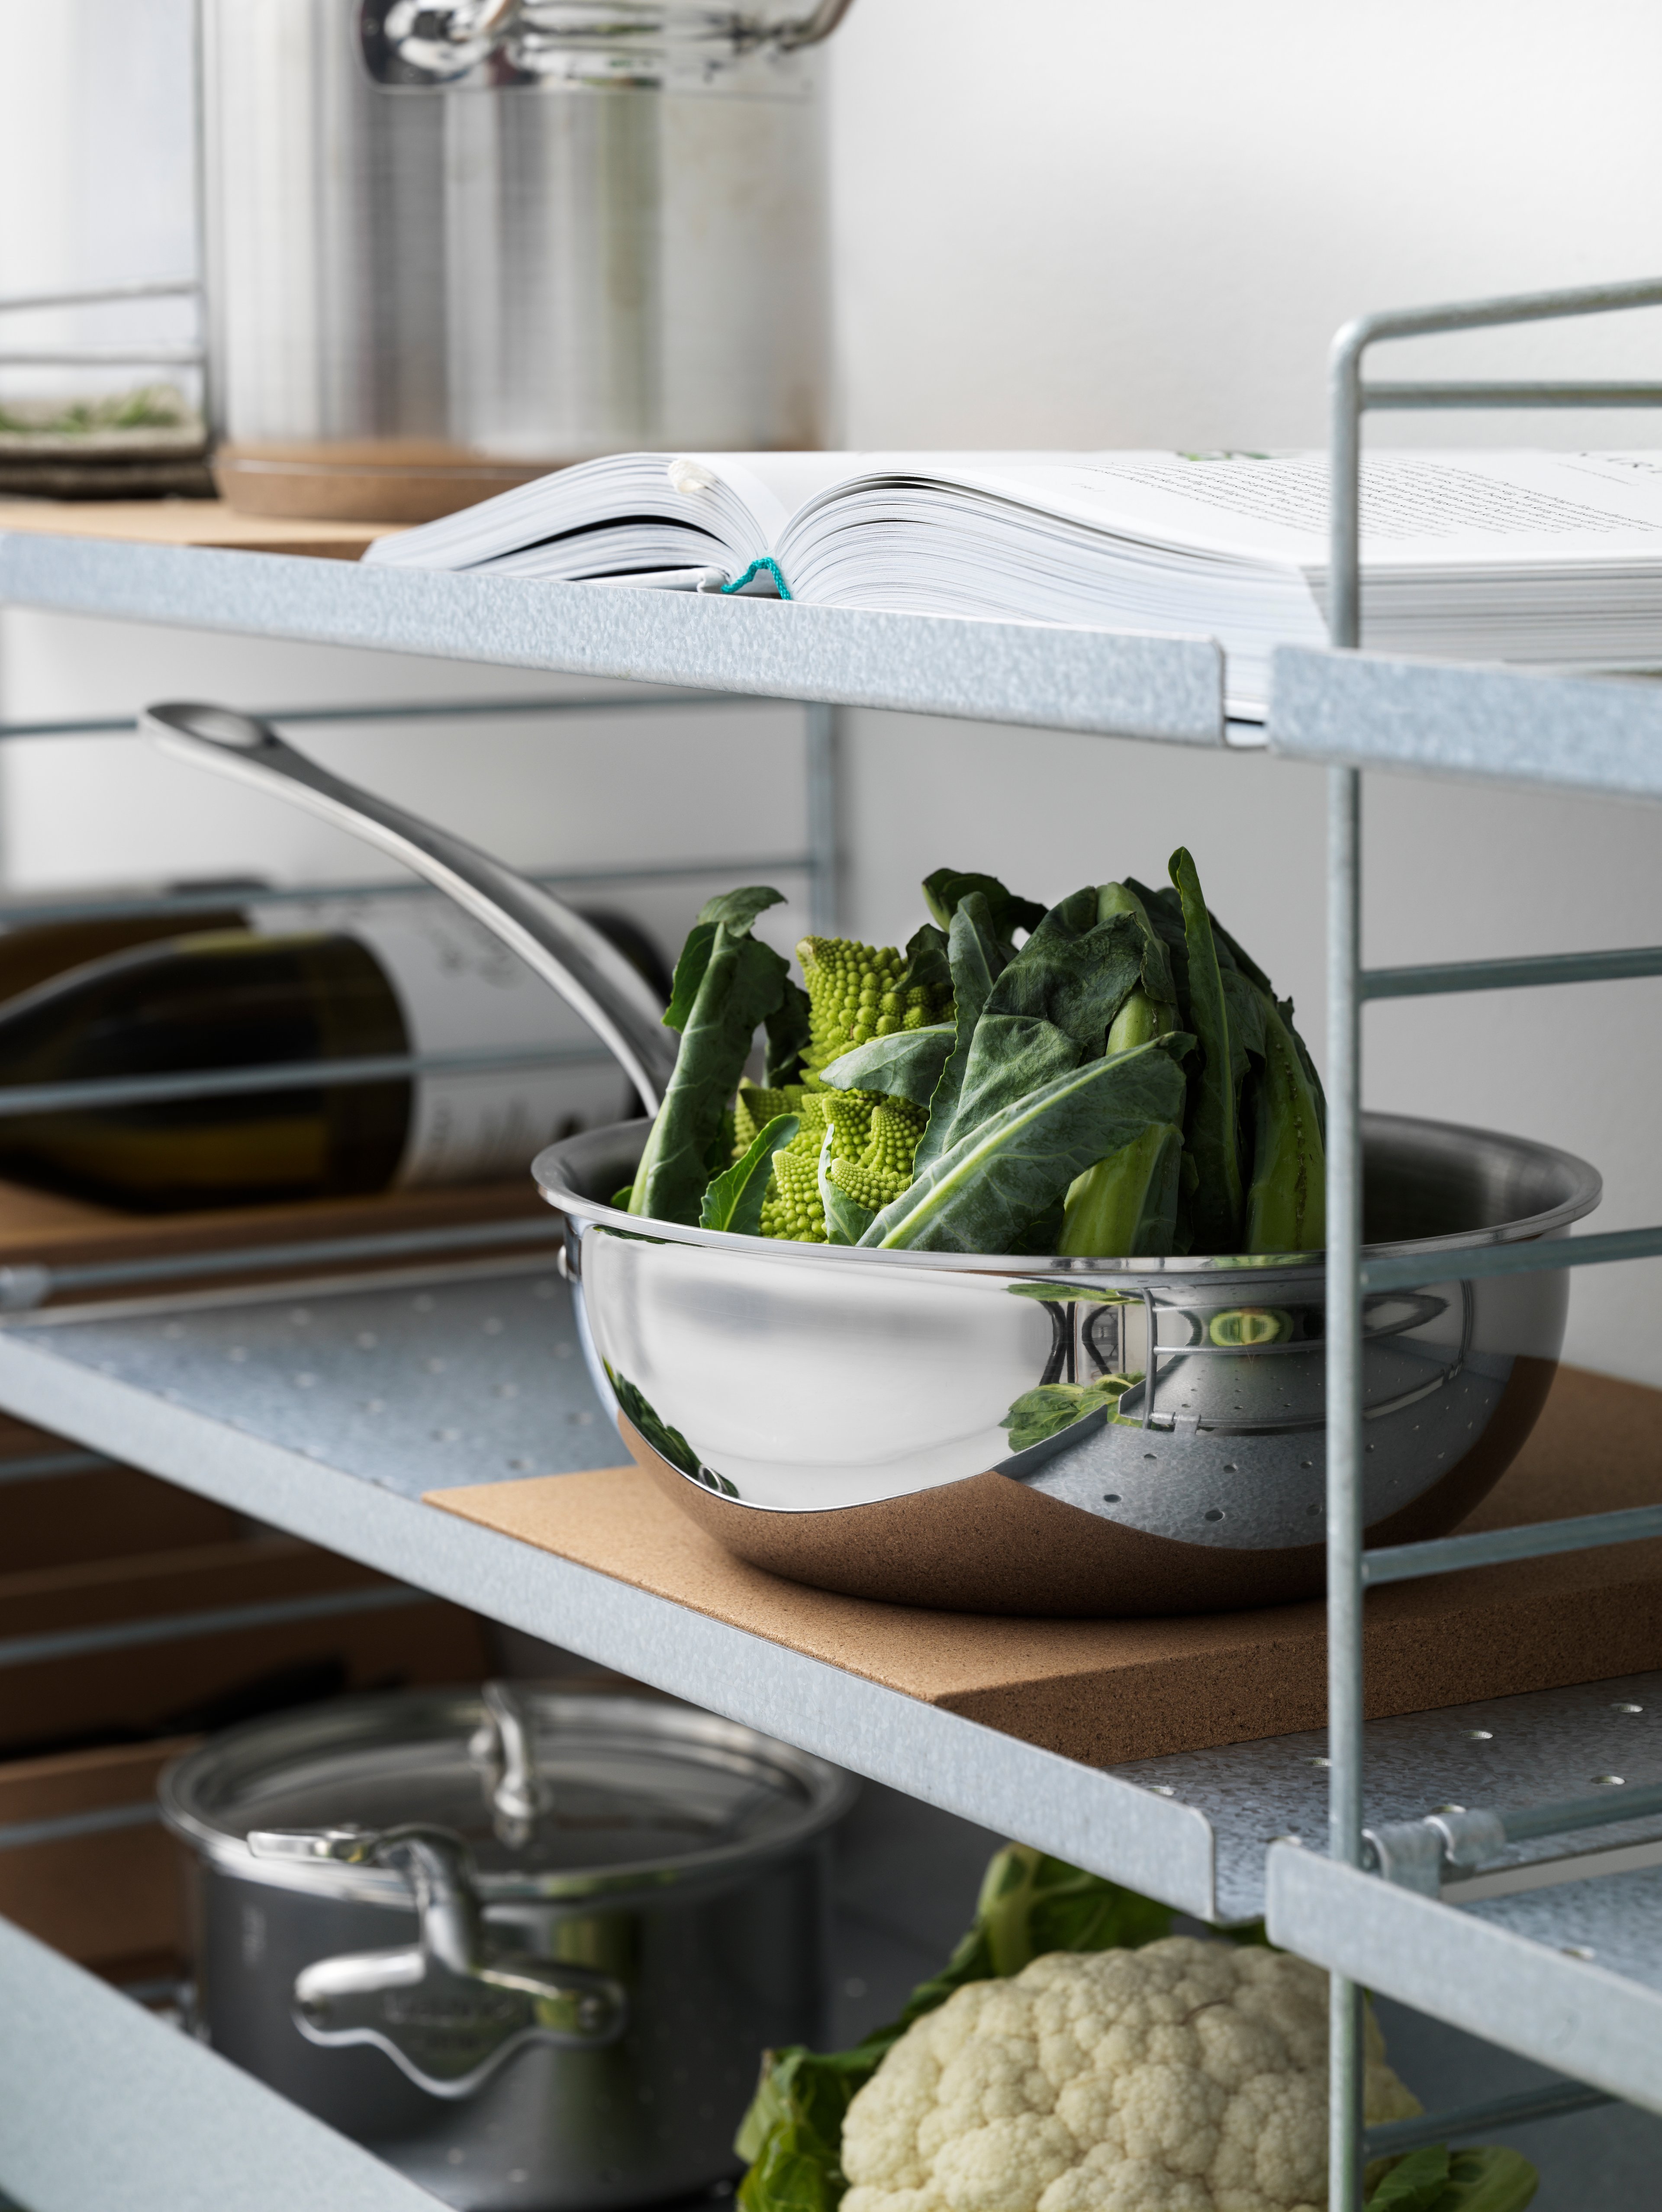 String shelf with floor panels from String System. Galvanized shelves and metal shelves with low edge in white along with underlays in cork. Perfect kitchen accessories.